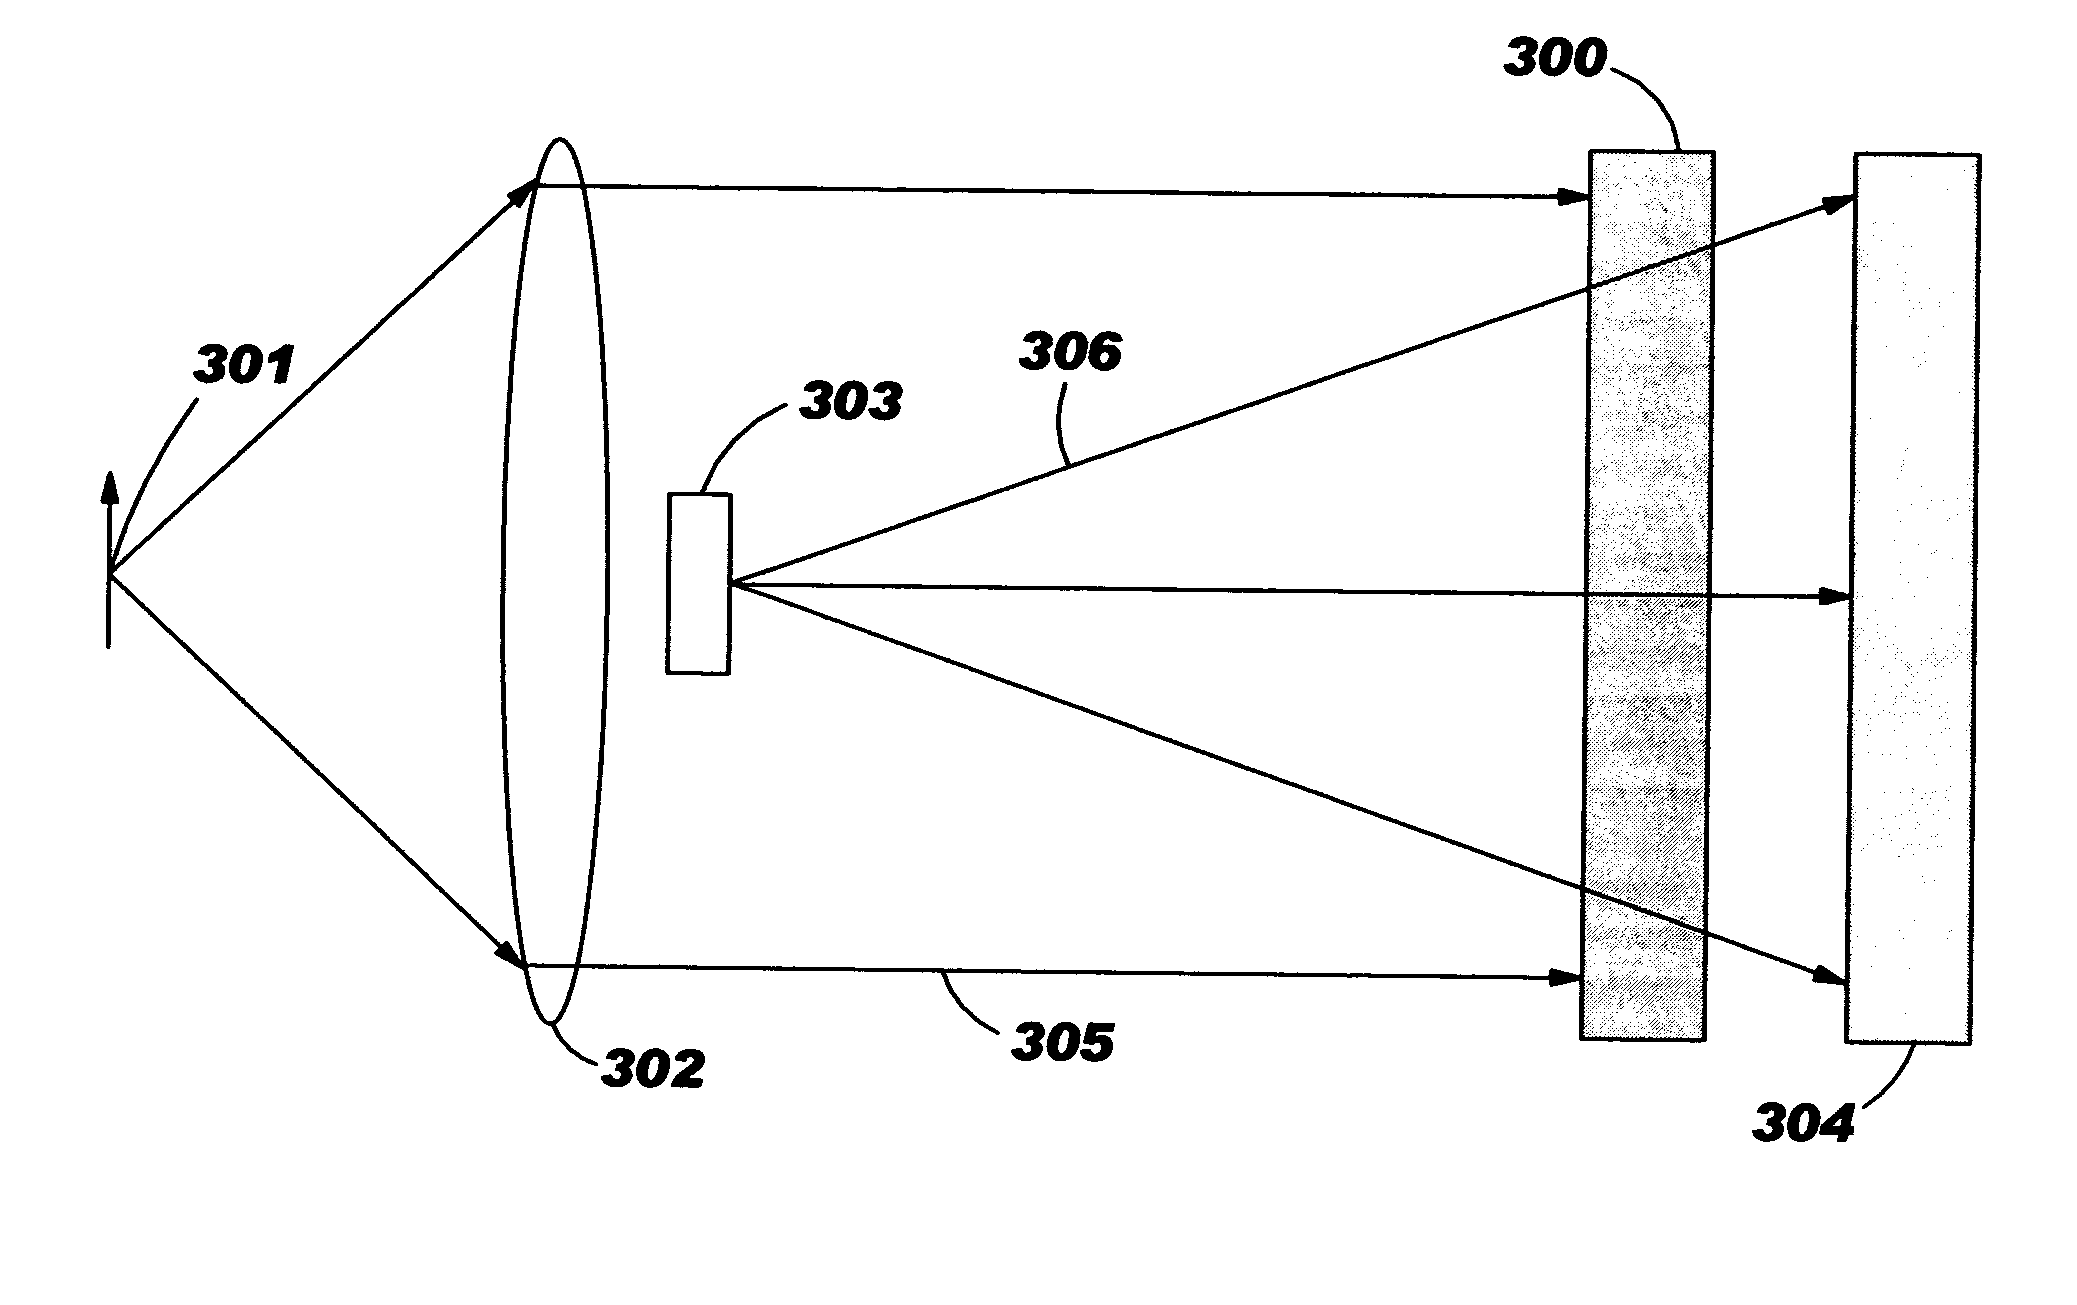 Radiation sensor with electro-thermal gain